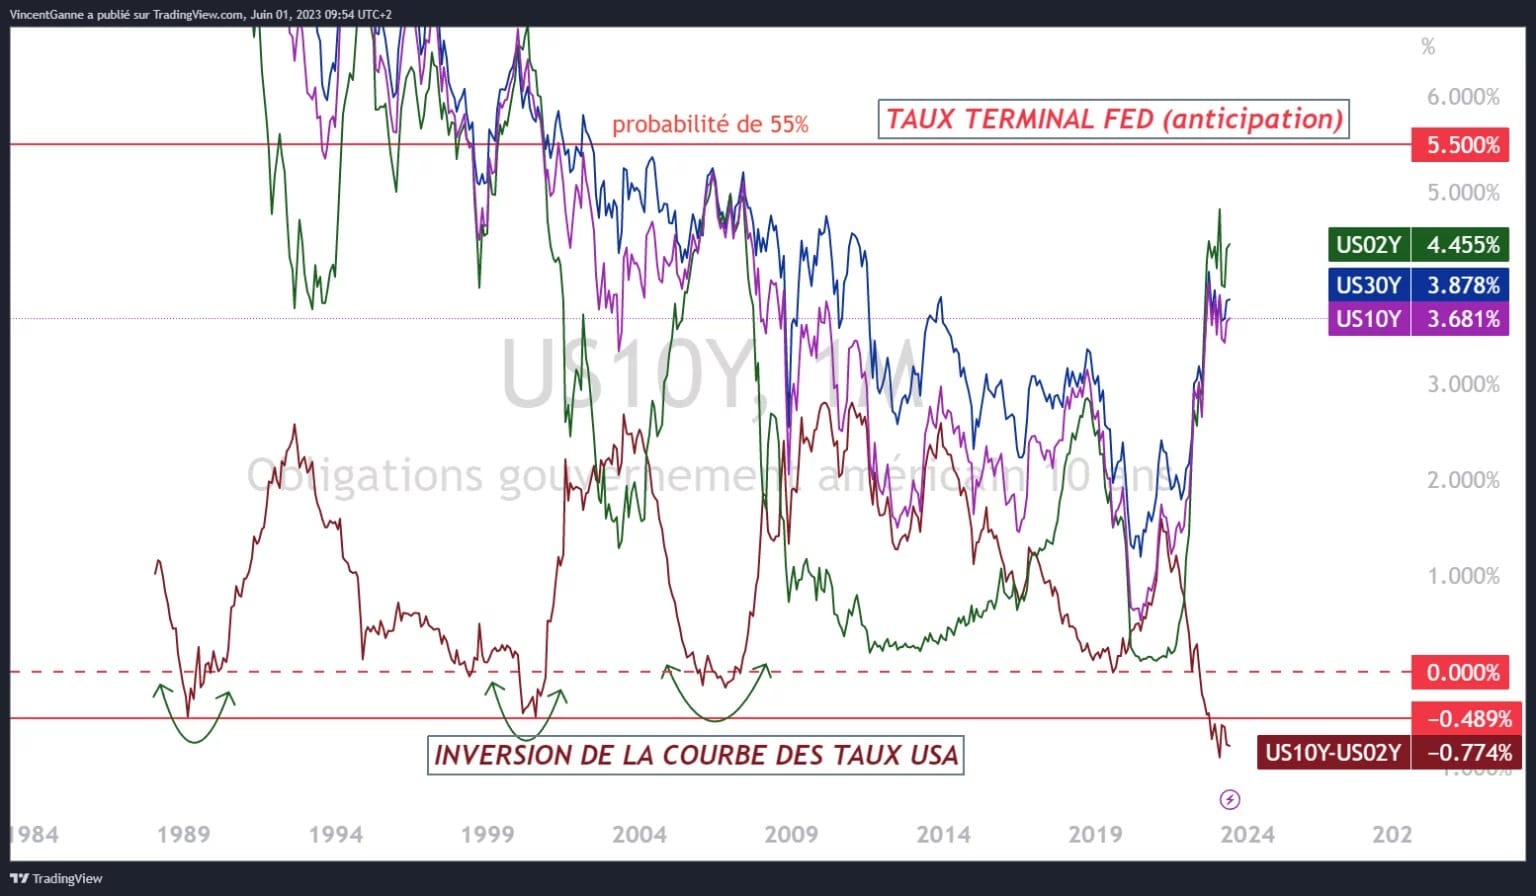 Graph produced with the TradingView website, which juxtaposes 2, 10 and 30-year US bond yields and the most likely terminal Fed rate